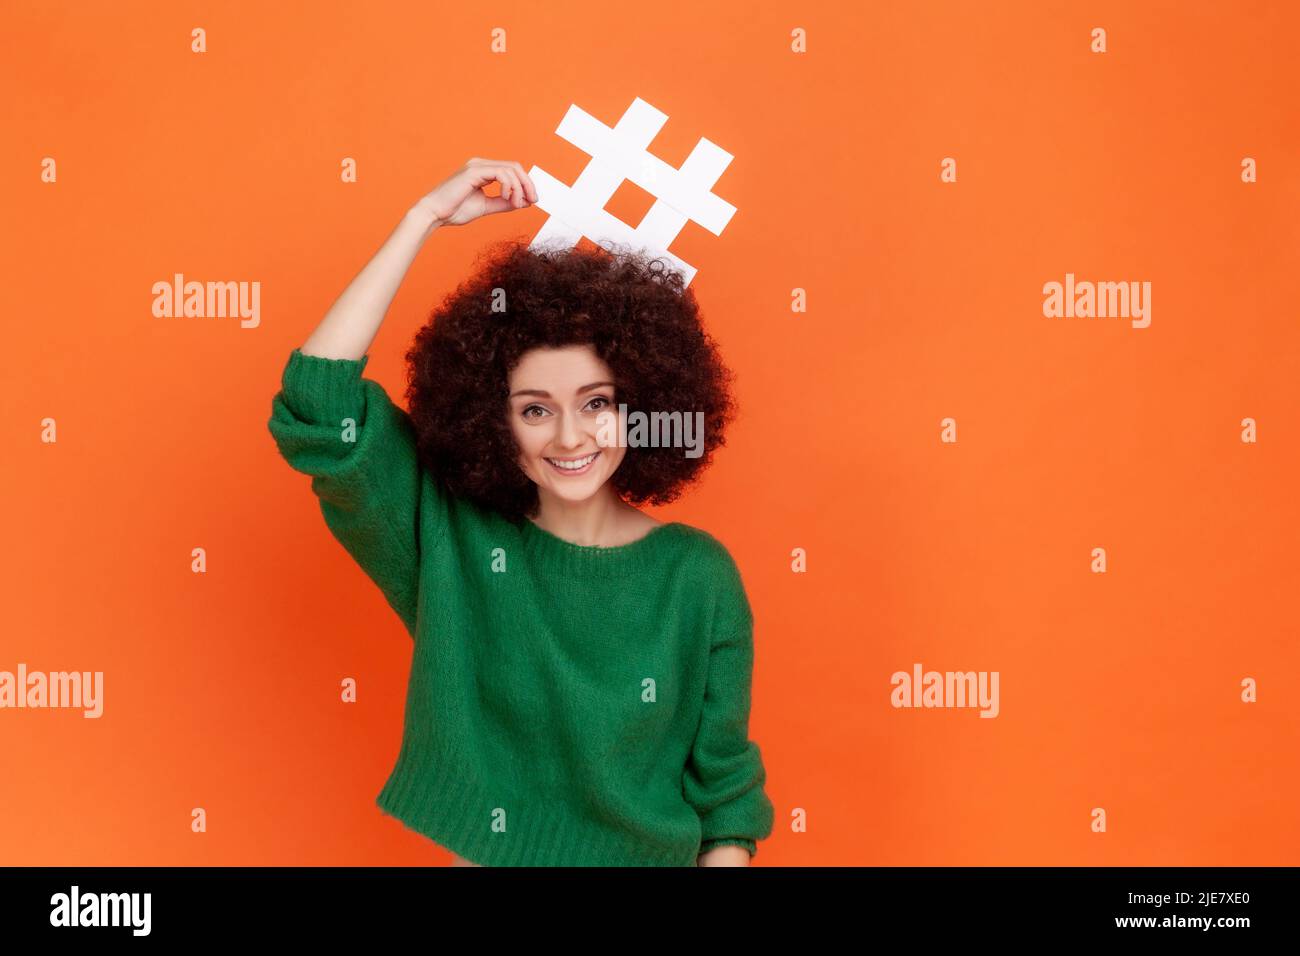 Portrait of funny positive woman with Afro hairstyle wearing green casual style sweater standing holding hashtag above her head, smiling. Indoor studio shot isolated on orange background. Stock Photo